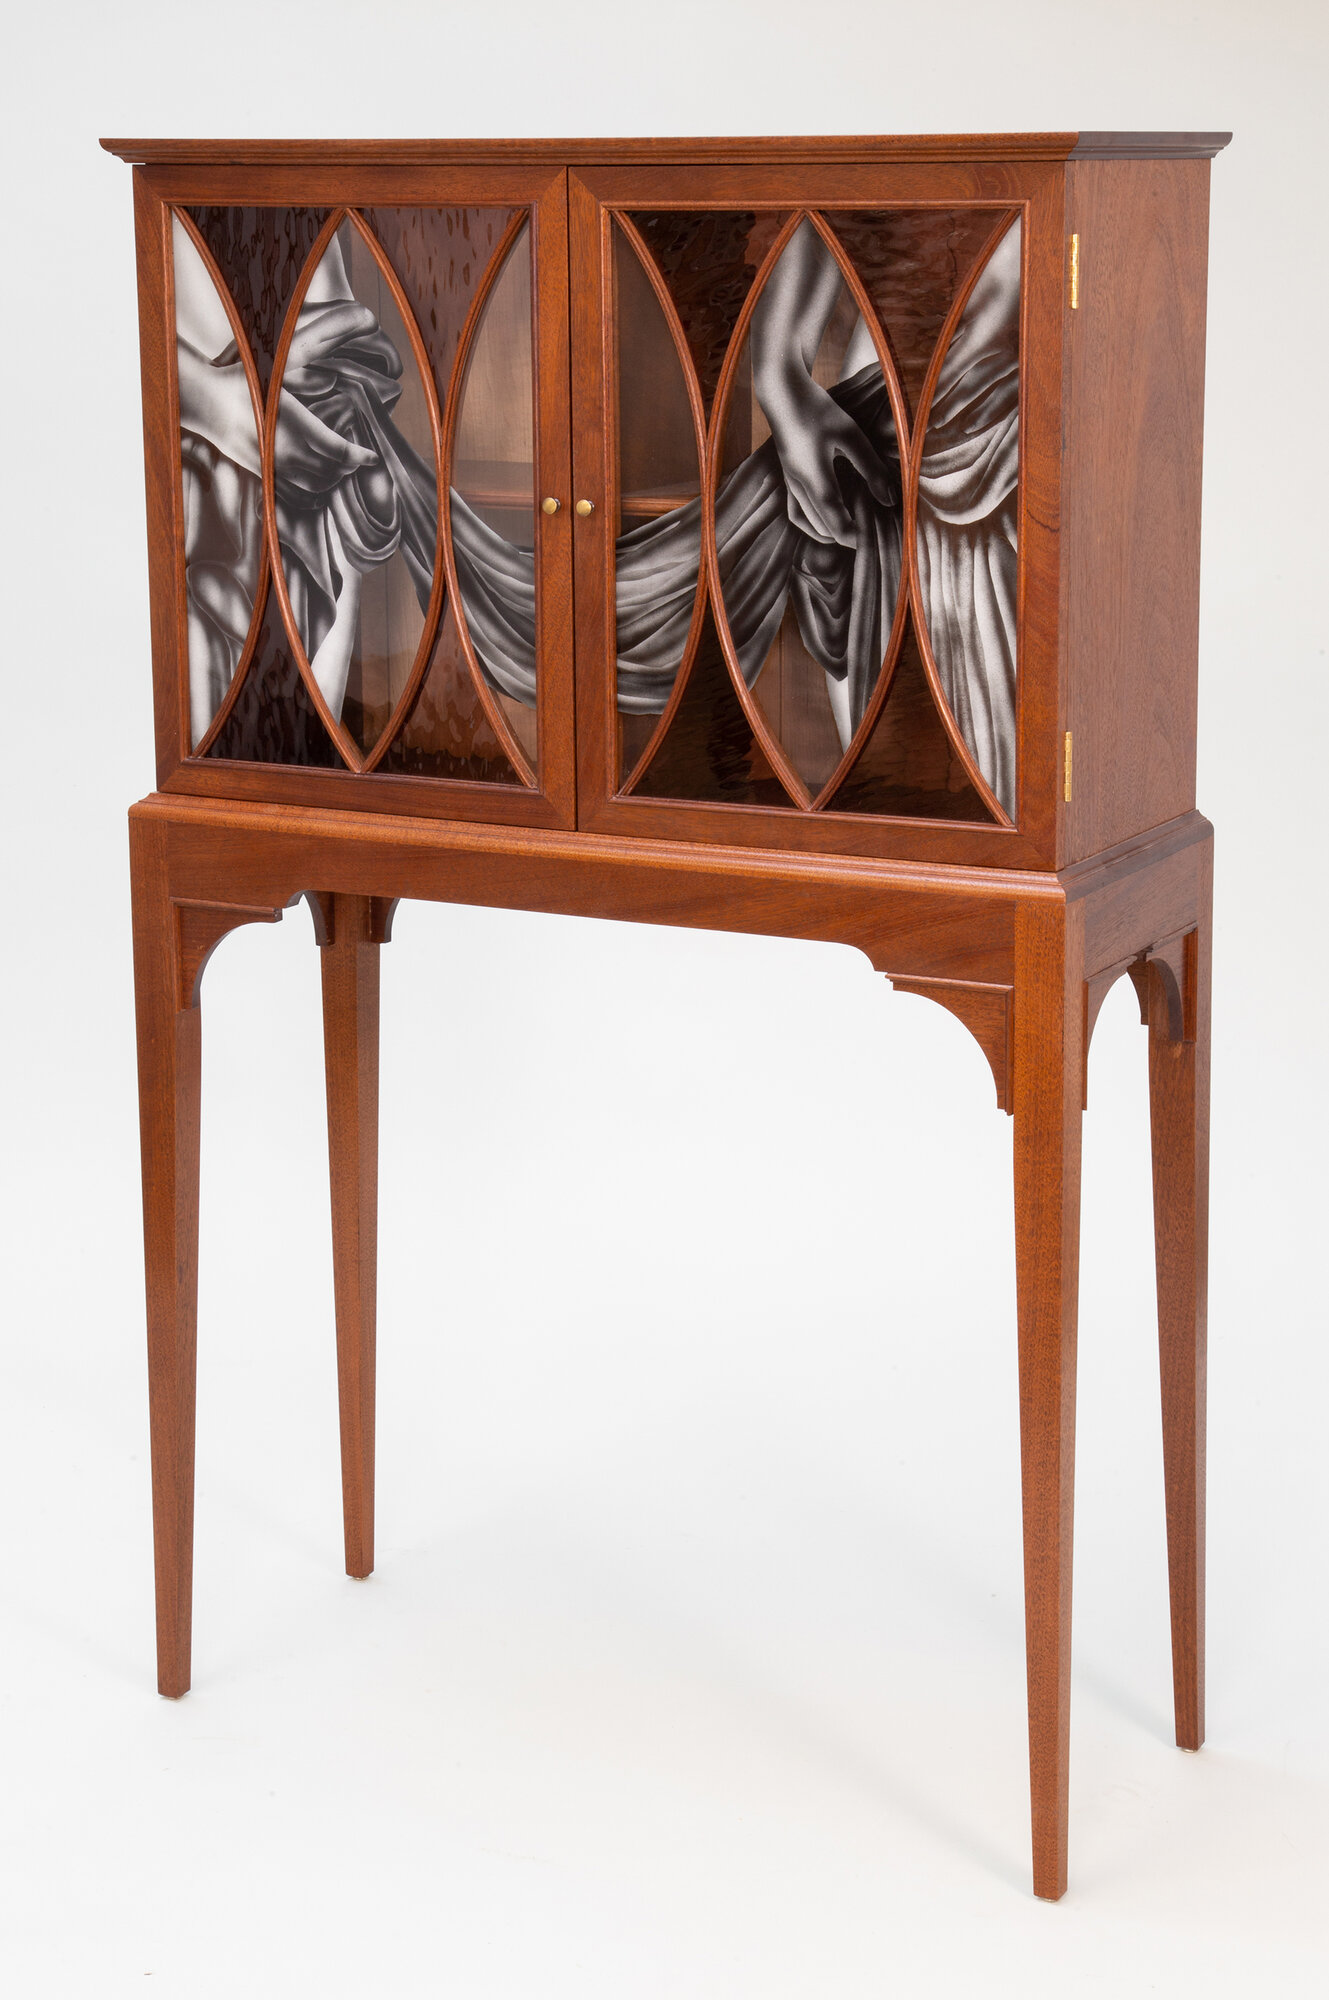 A Partially Draped Cabinet